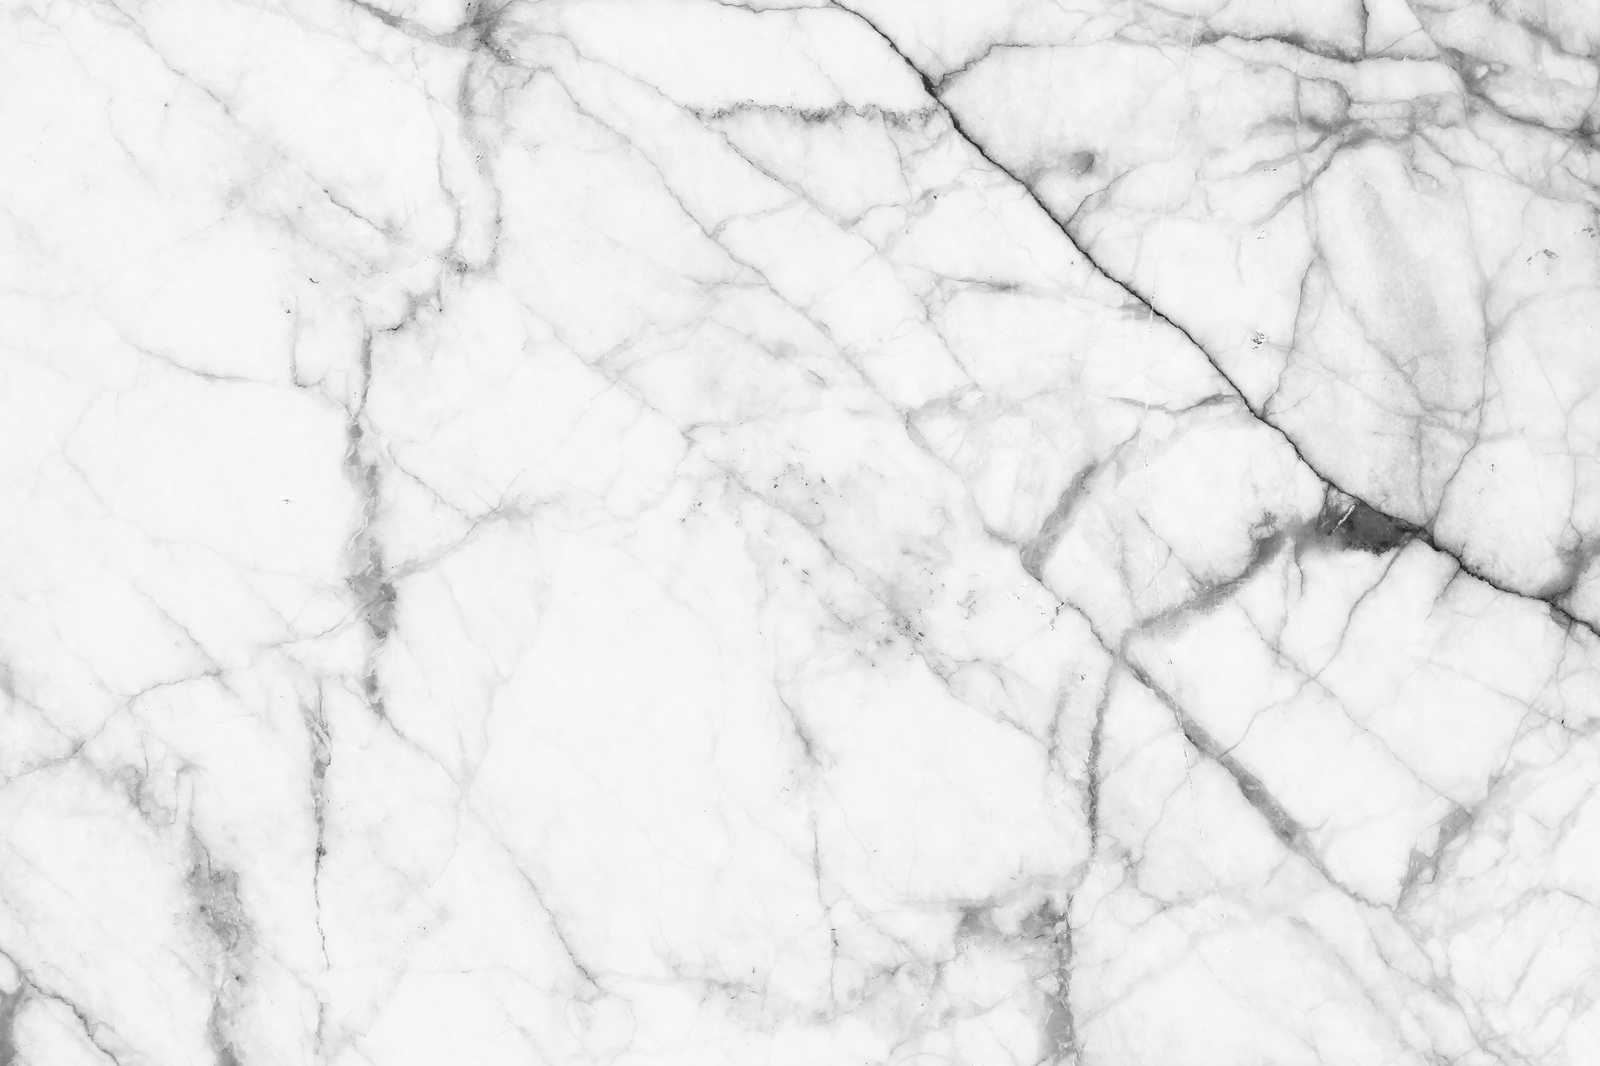             Black and White Canvas Painting Marble with Nature Details - 1.20 m x 0.80 m
        